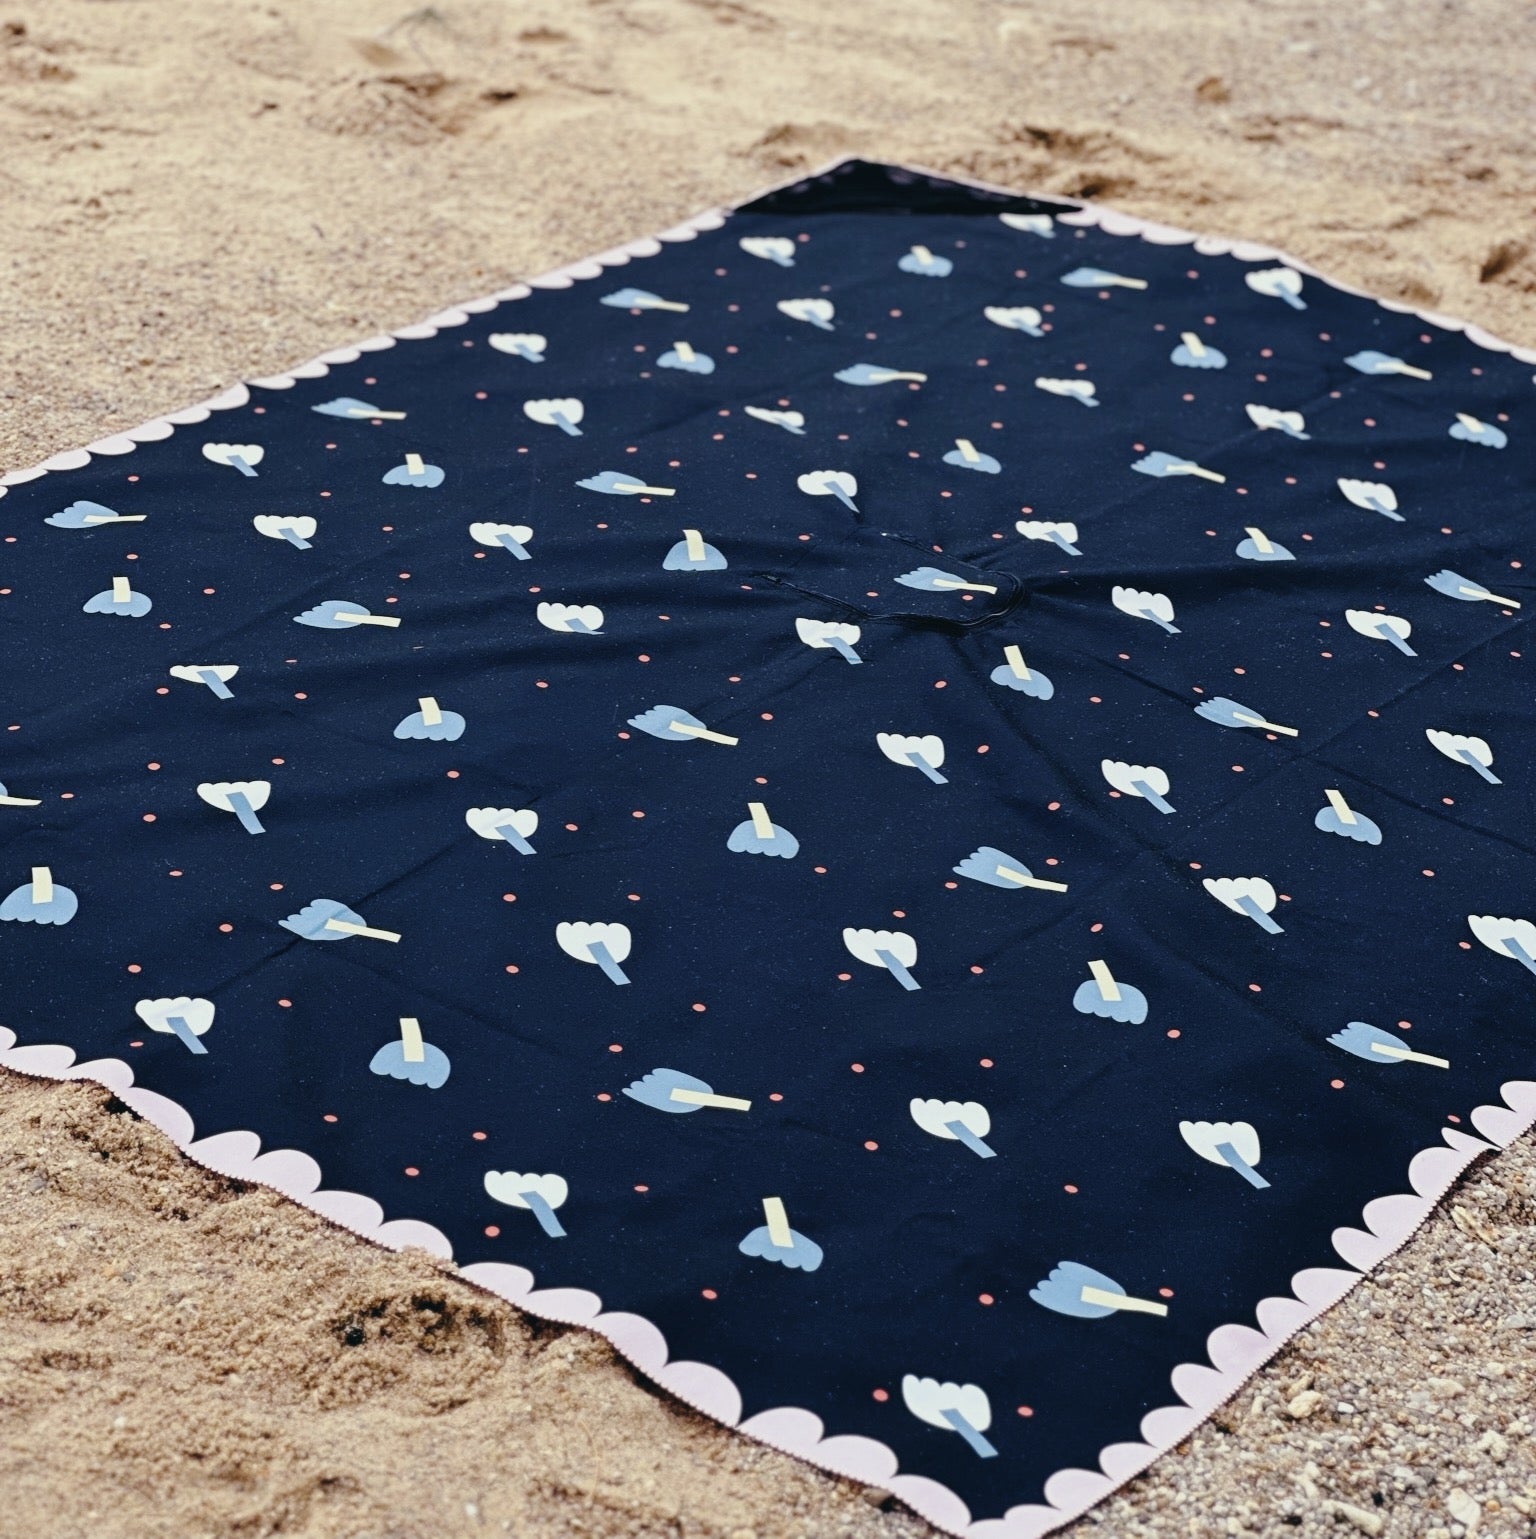 black whimsy picnic mat waterproof and lightweight